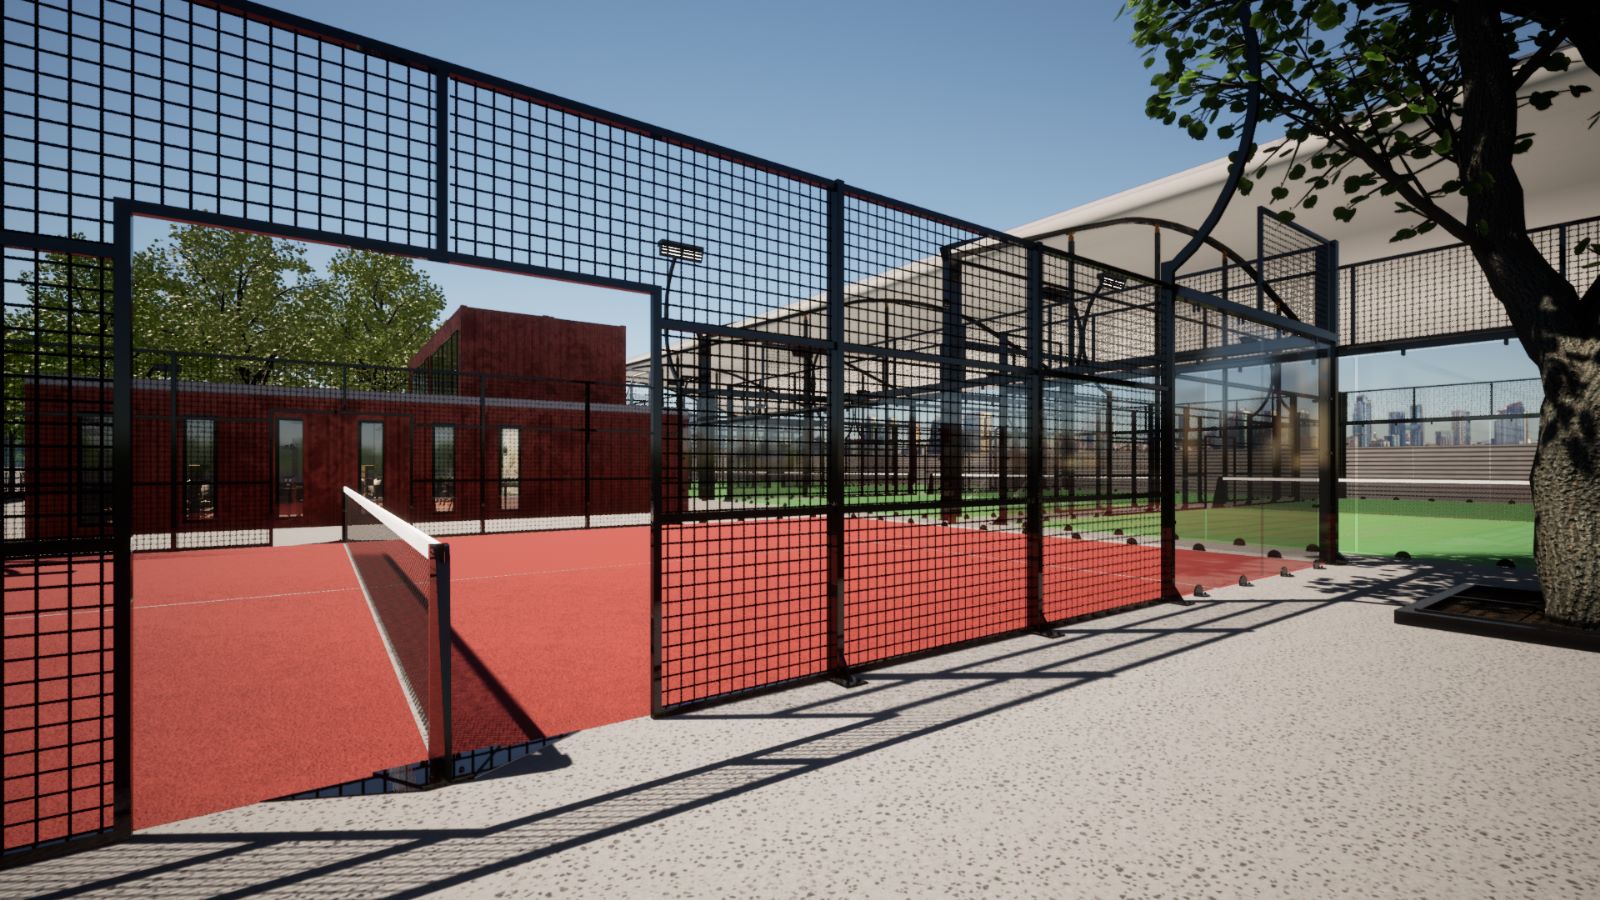 Home Padel 2: the new complex of padel settles in Asnières